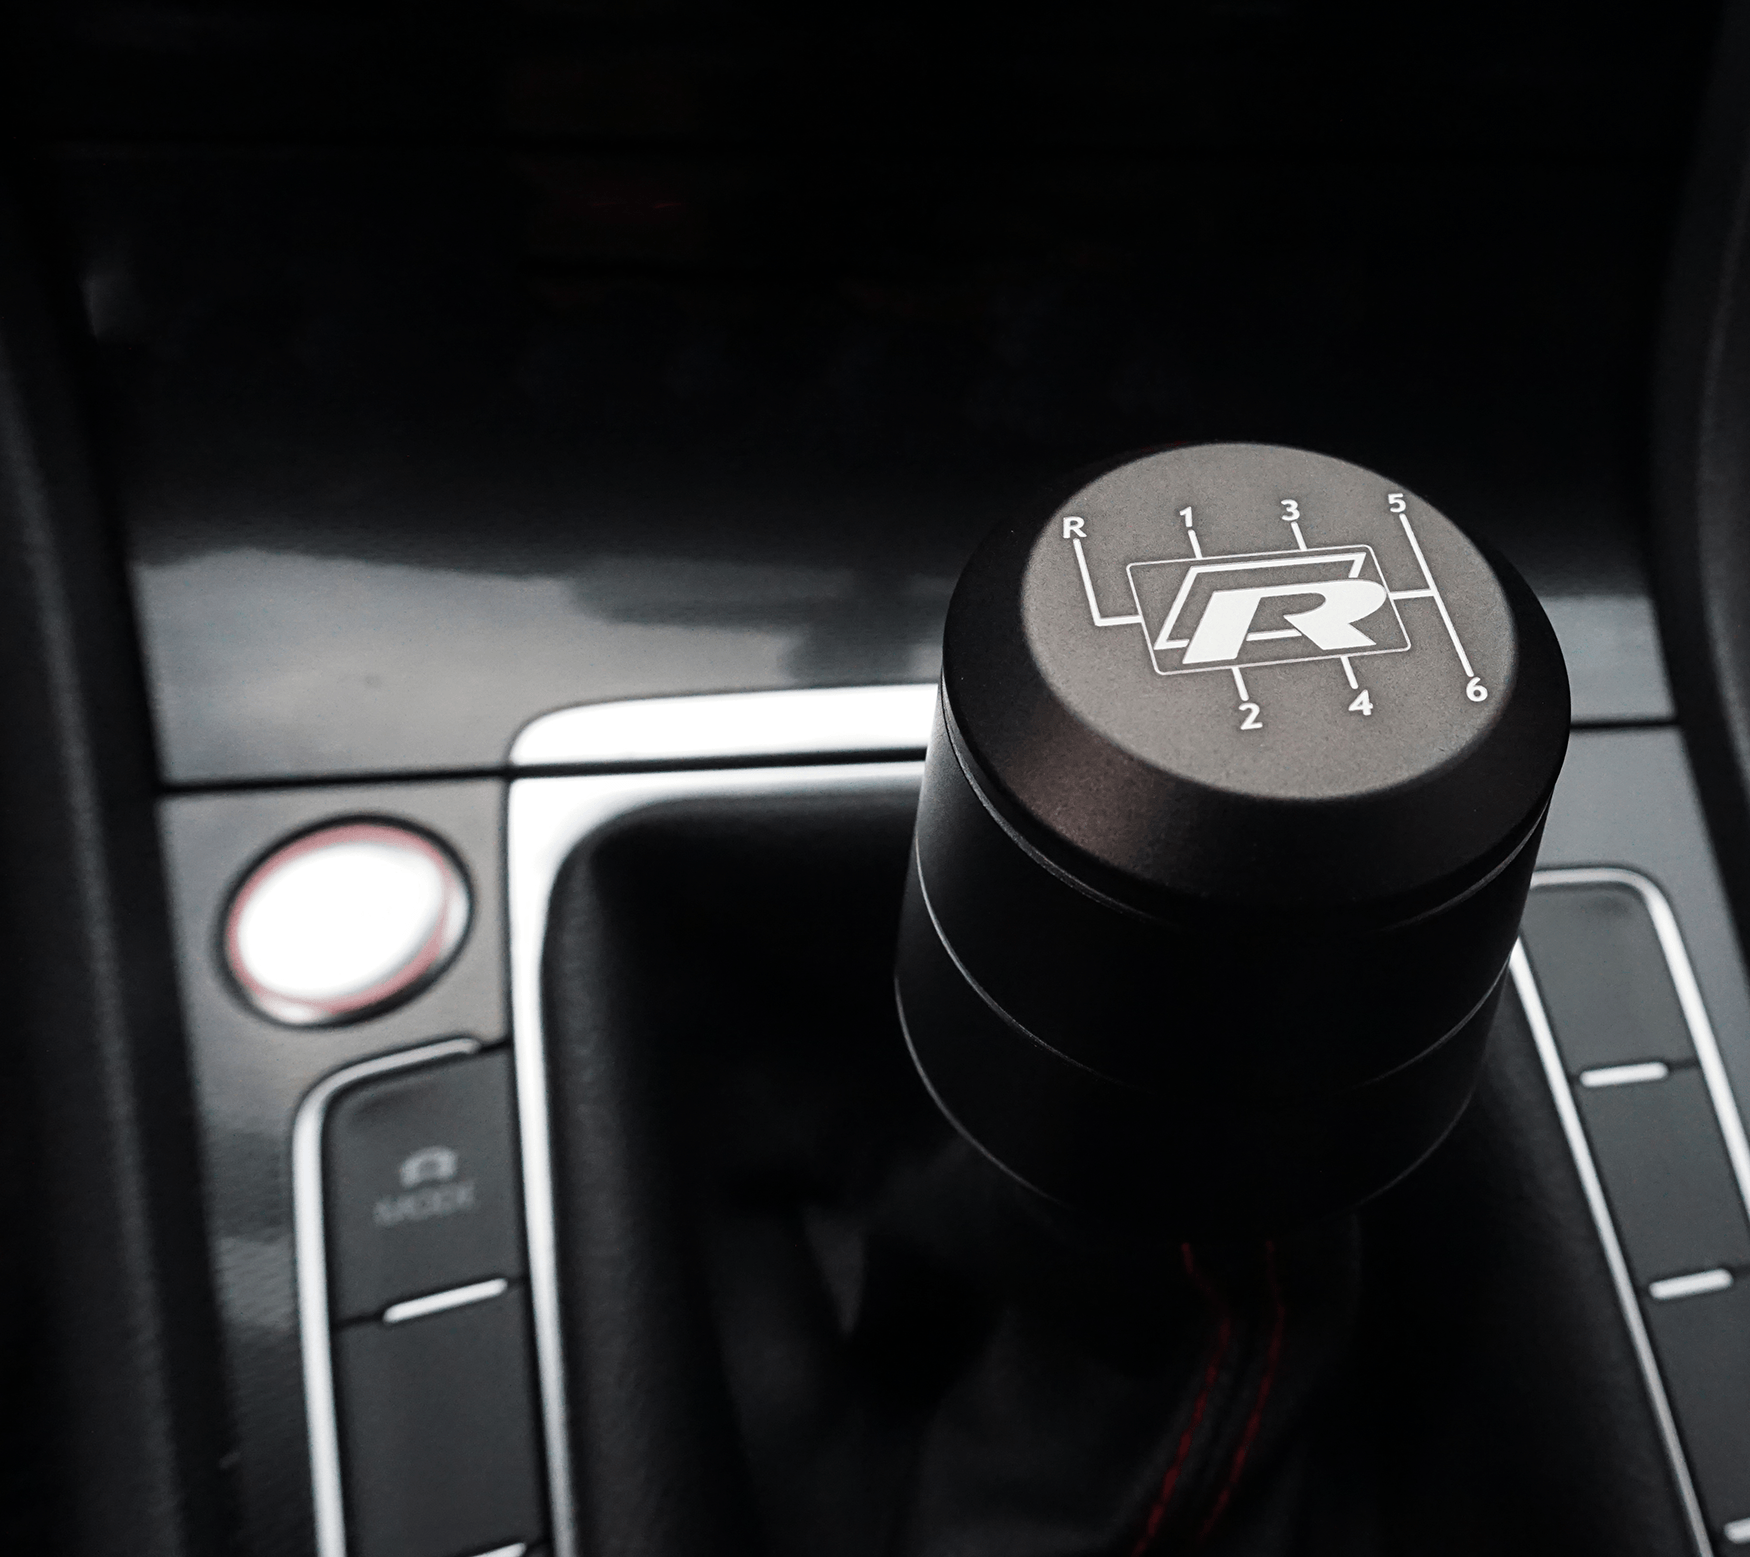 NEW V2 Weighted Shift Knob - Manual Audi/VW